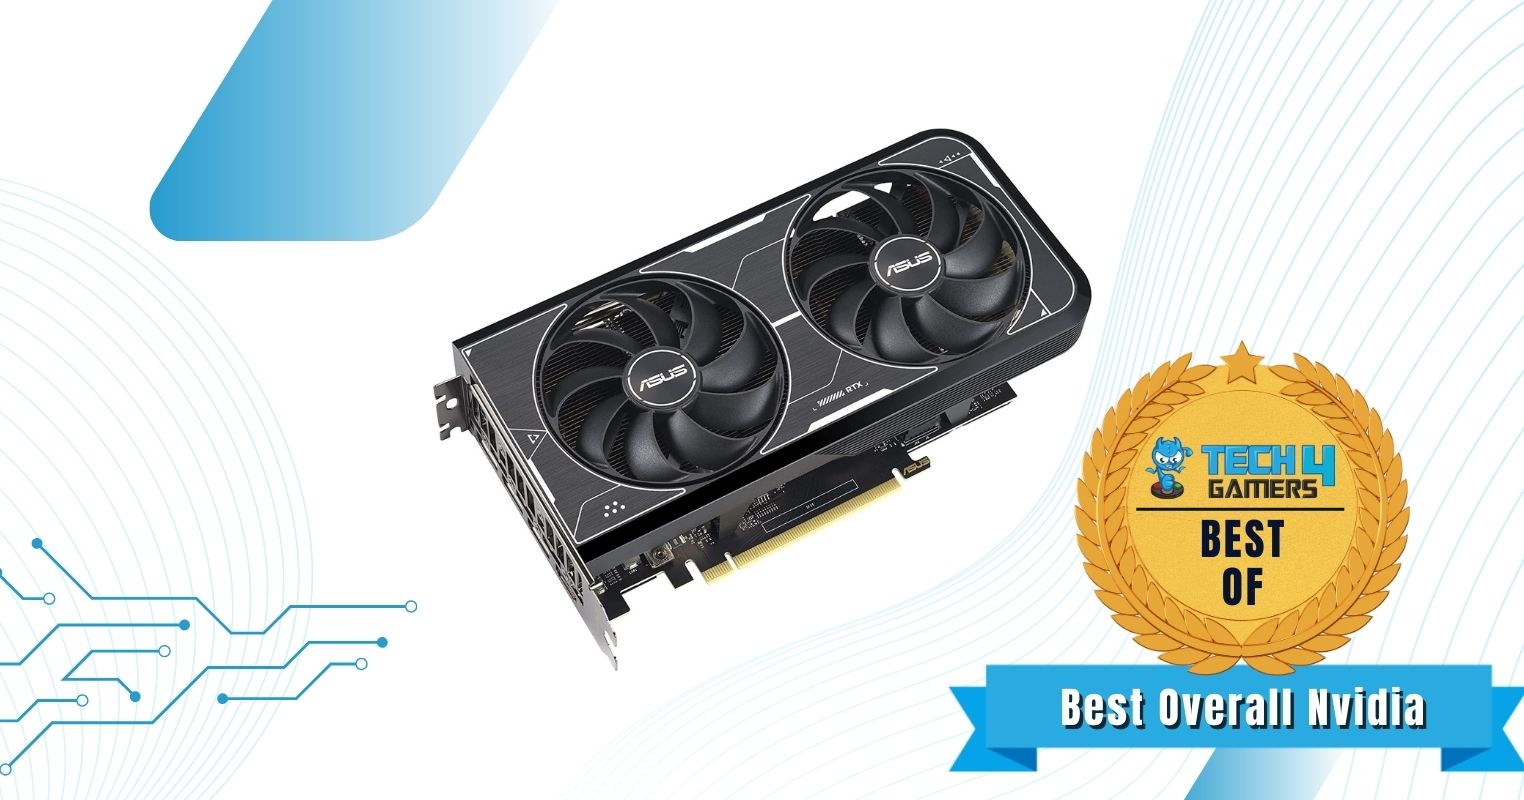 ASUS DUAL OC GeForce RTX 3060 Ti - Best Overall NVIDIA Graphics Card for 1080p